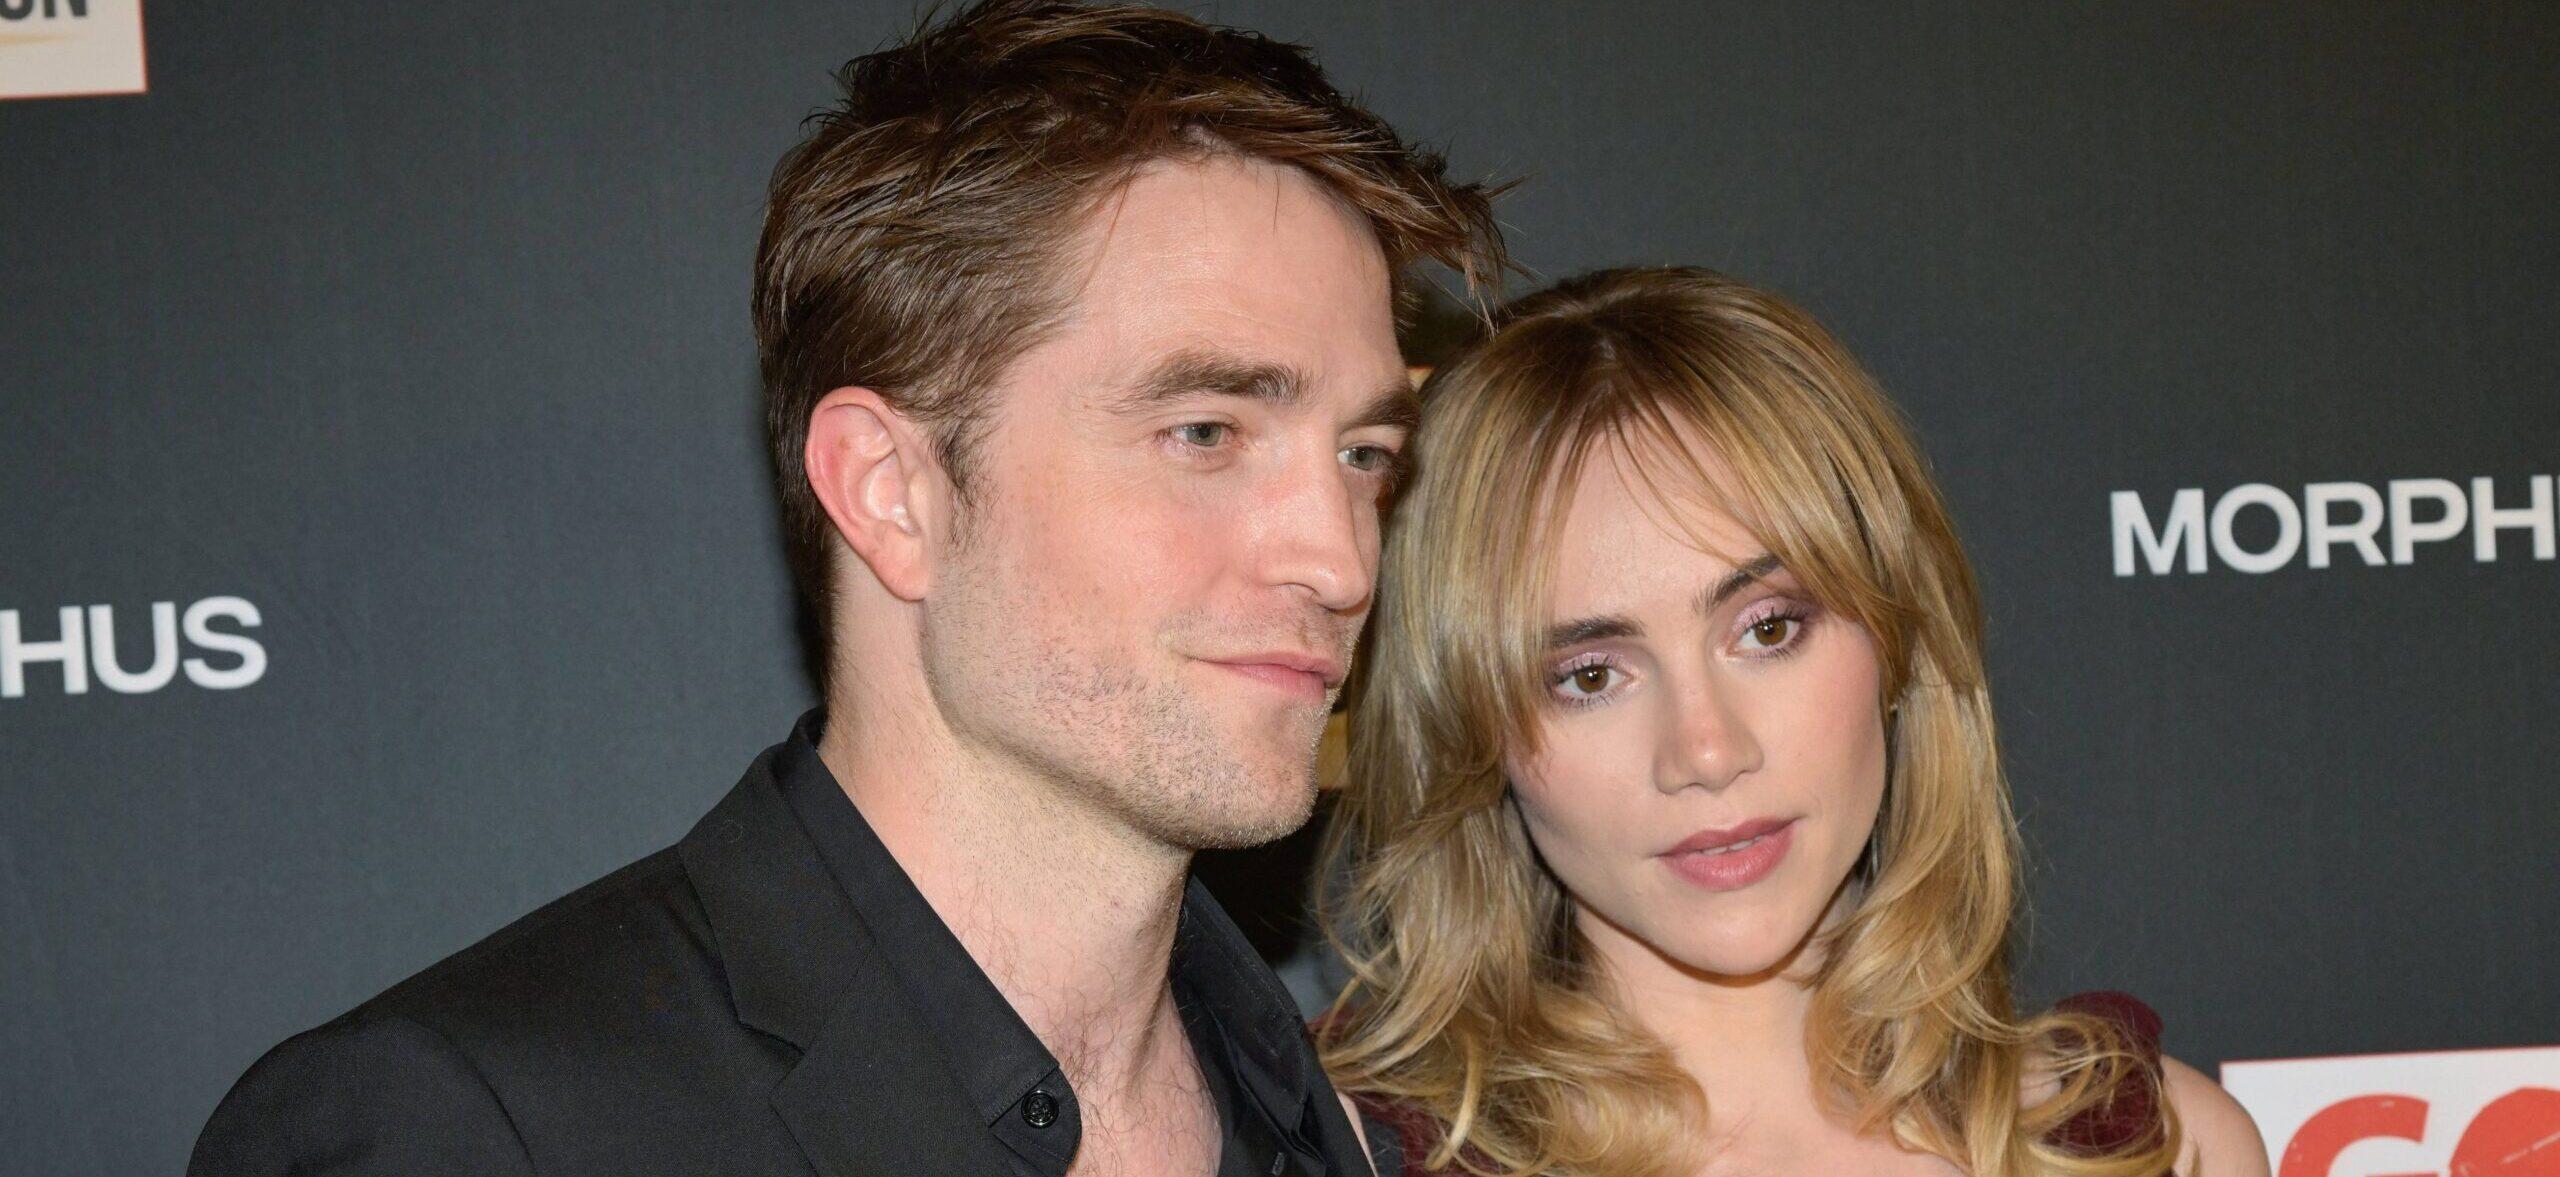 Suki Waterhouse Unveils Pregnancy In An Adorable Way As She Expects First Child With Robert Pattinson!